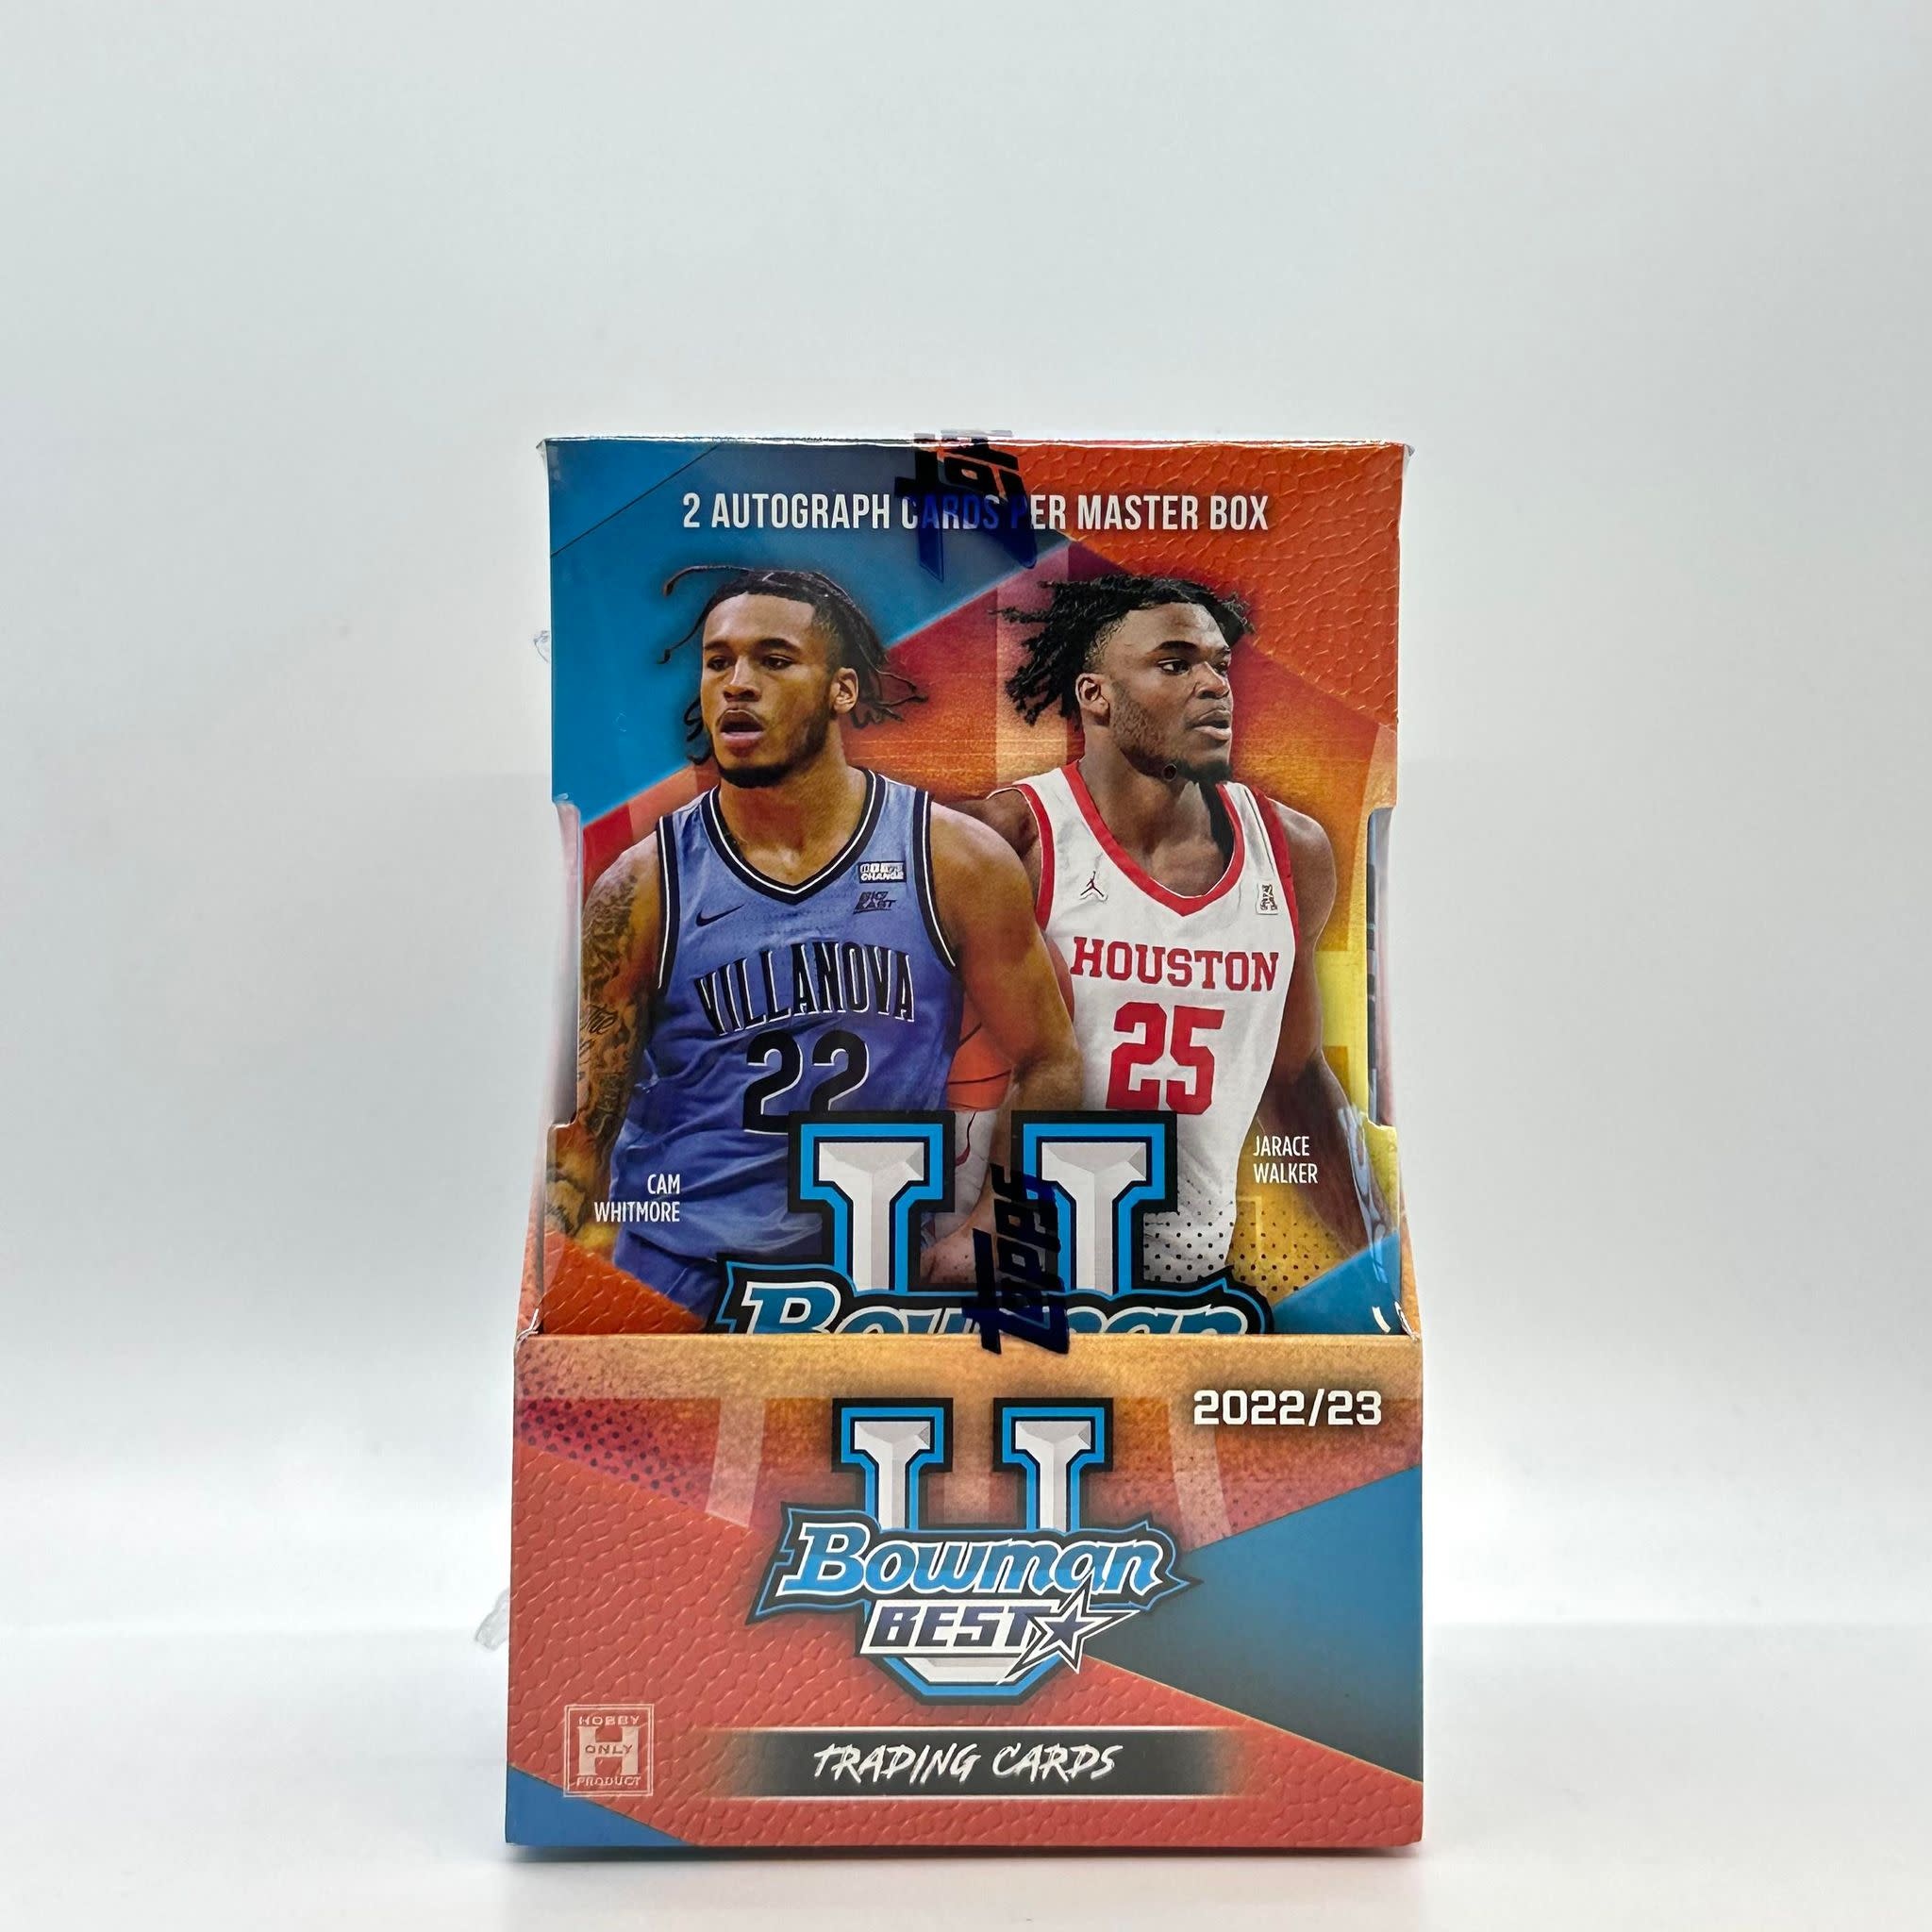 Topps Releases First-Ever Chrome Basketball Hobby Shop Collection